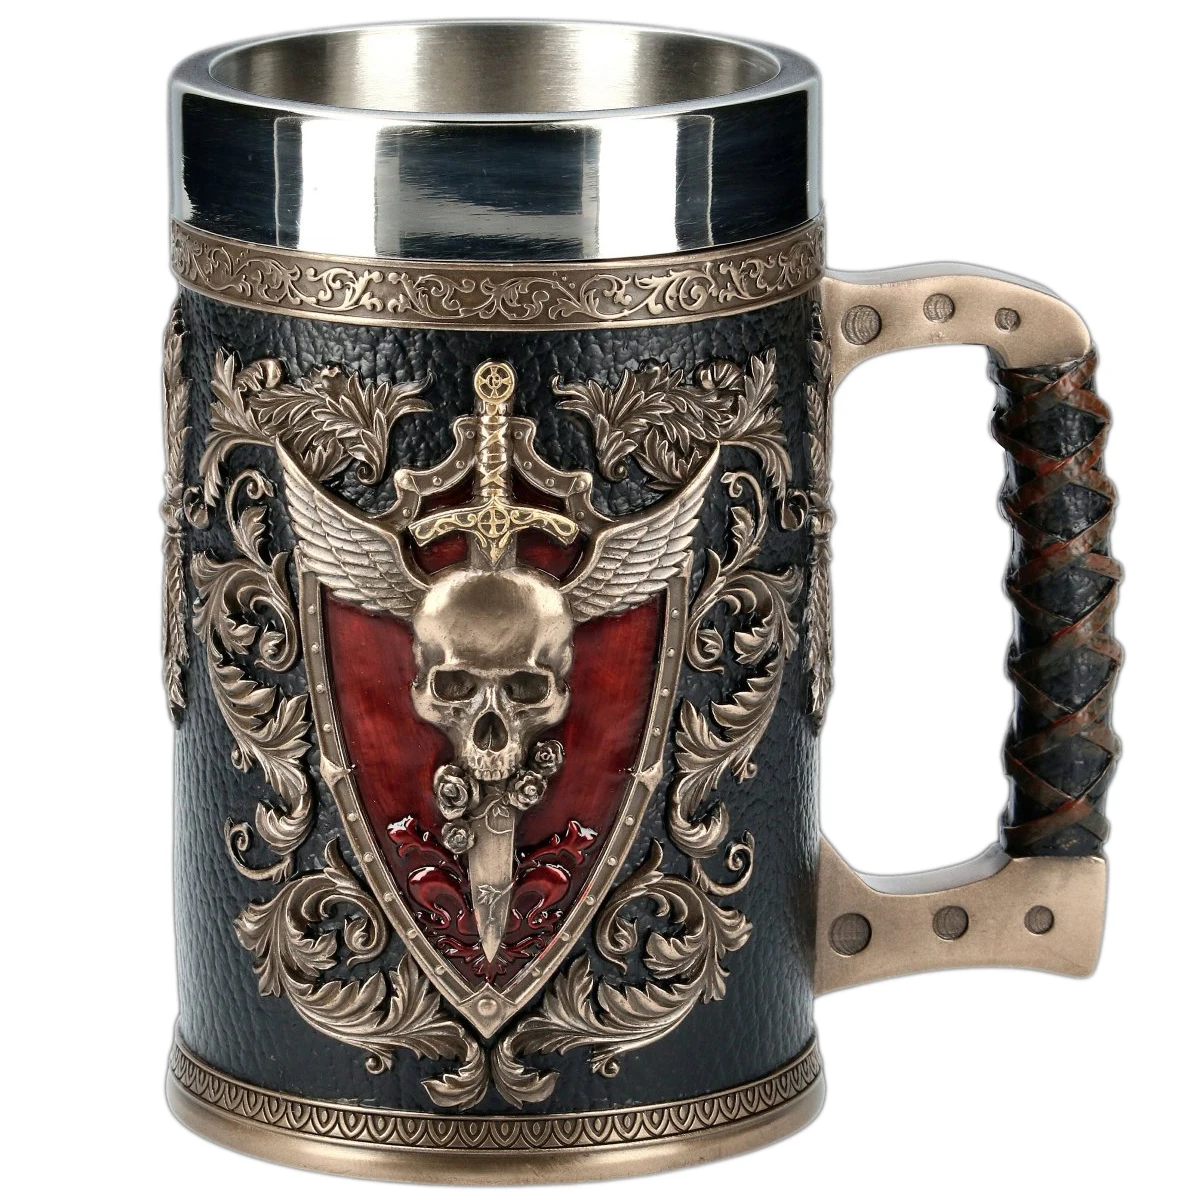 3D Beer Mugs Stein Tankard Double Headed Eagle Winged Sword And Shield Skull Crest Stainless Steel & Resin Coffee Cup Mug 600ml